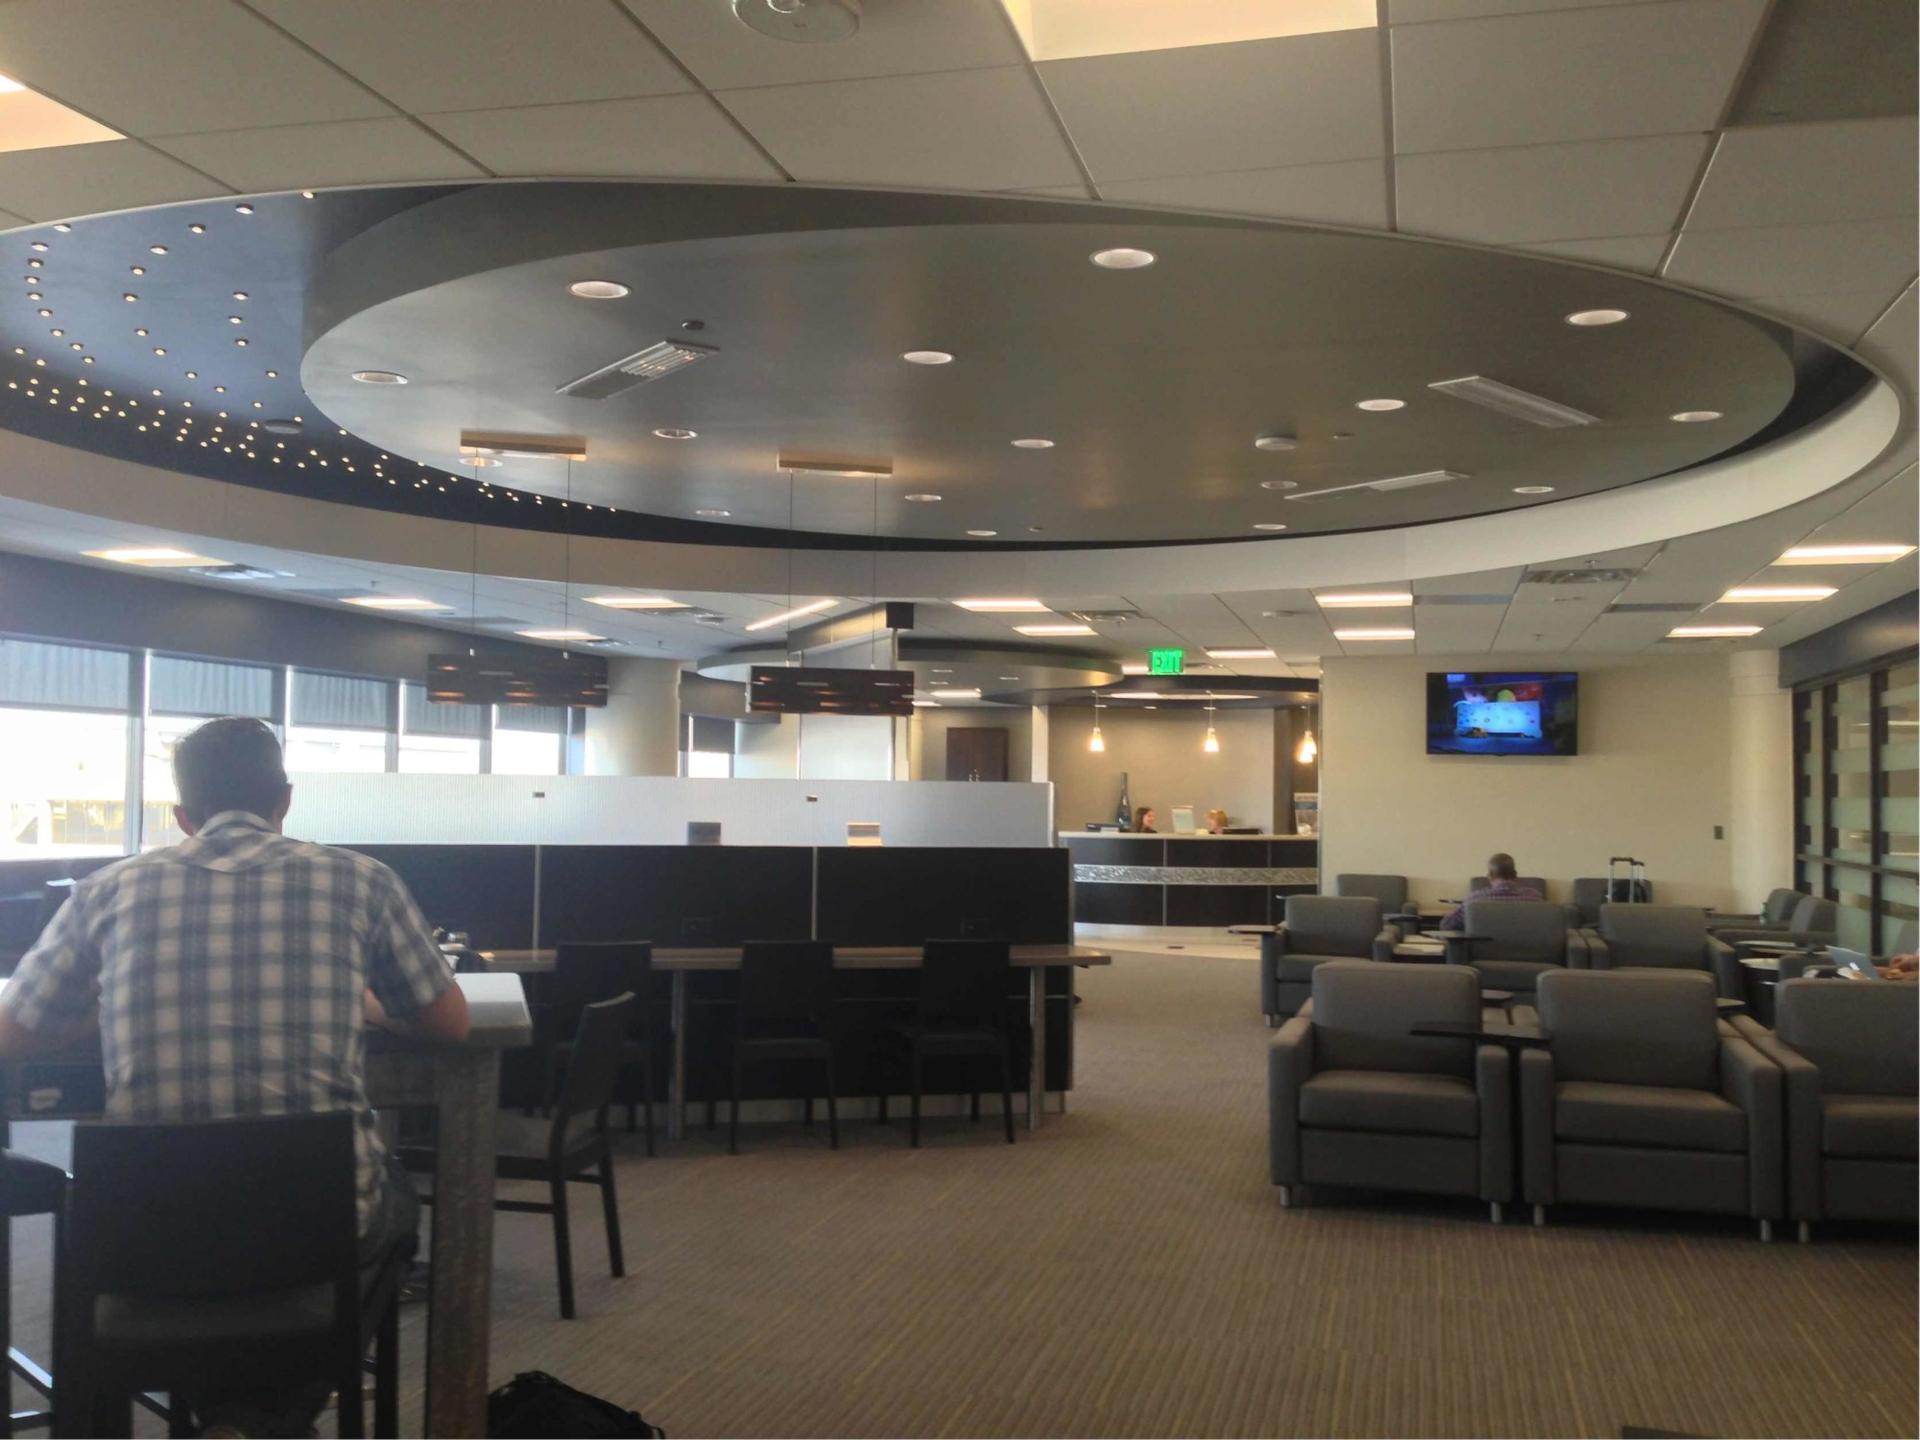 American Airlines Admirals Club image 1 of 12